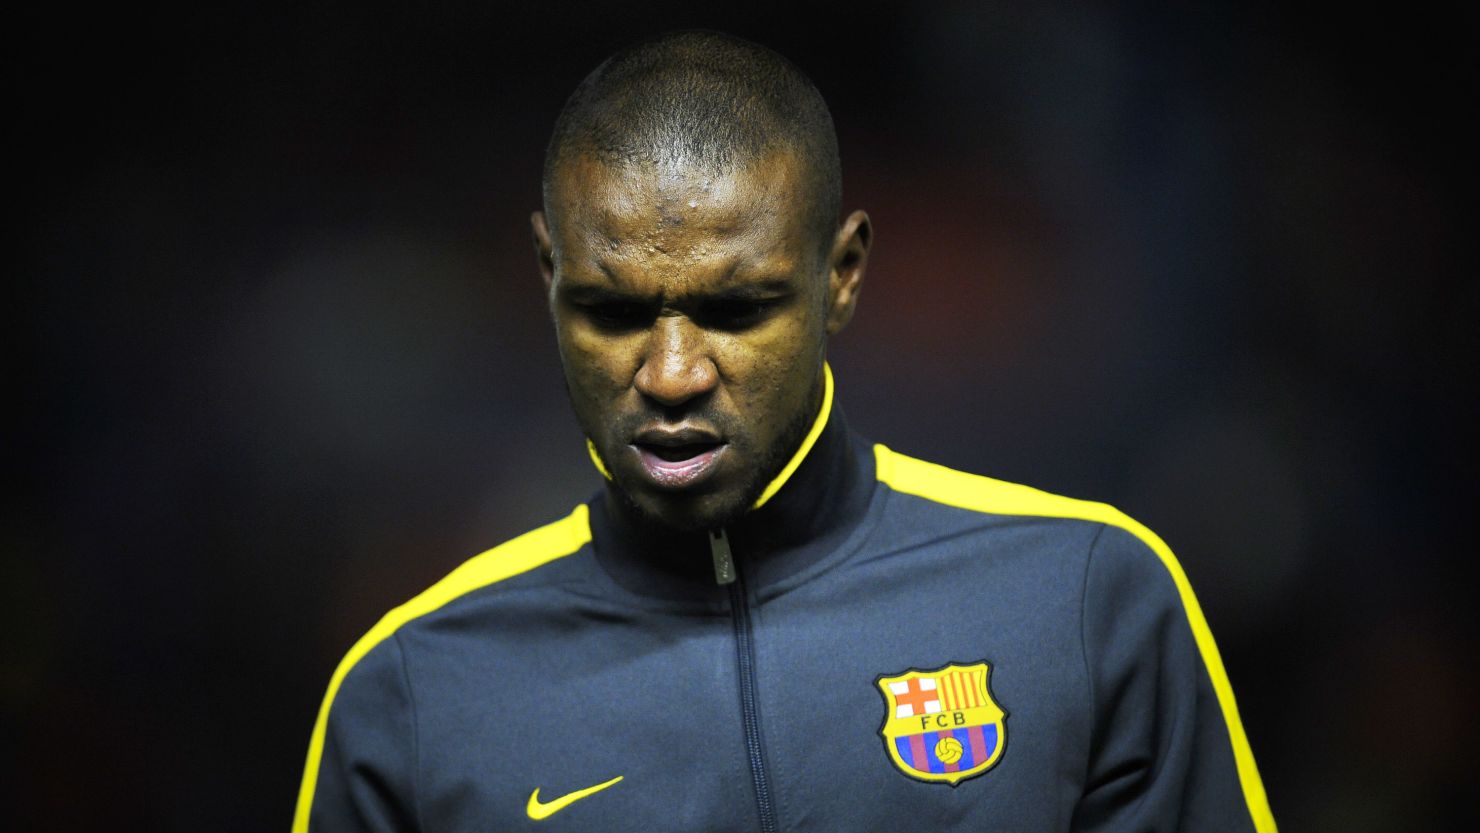 French defender Eric Abidal moved to Spanish club Barcelona from Lyon in 2007